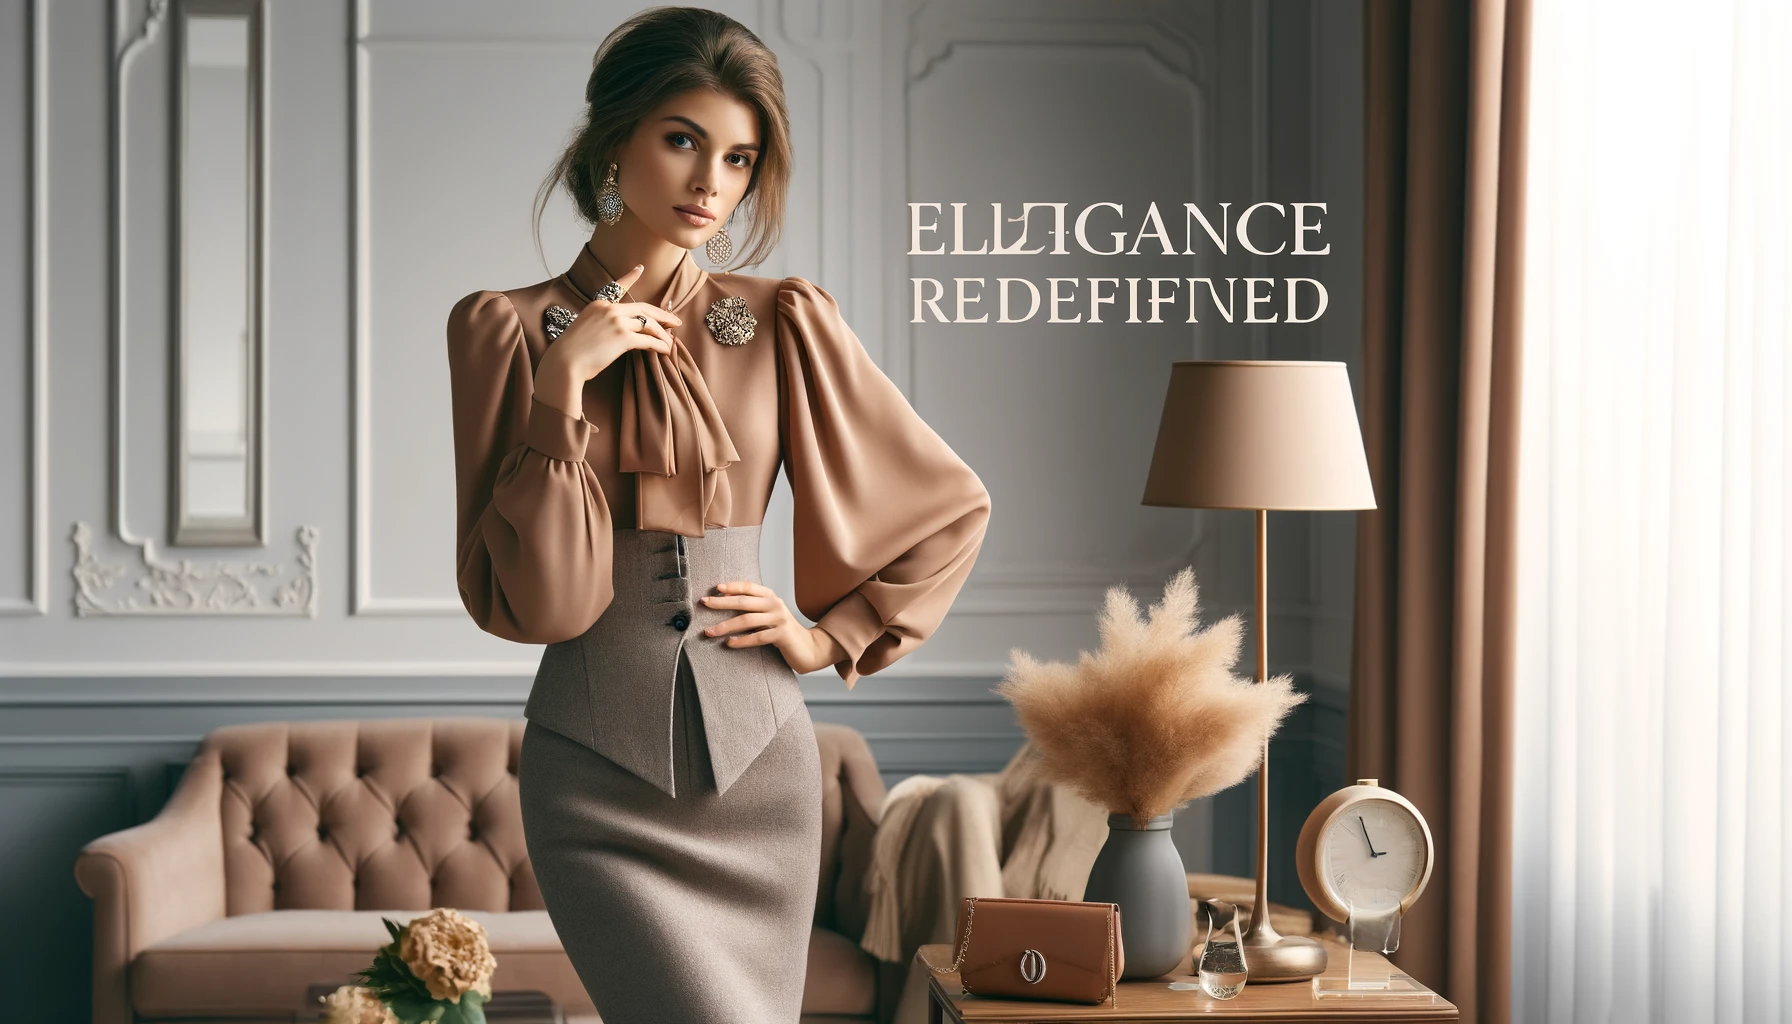 Create an image that visualizes a rebuttal to the criticism of being 'cheap' for the fashionable women's apparel brand 'Apres Jour.' Feature stylish, high-quality clothing on a confident woman posing in an elegant setting. The woman is wearing a sophisticated dress from 'Apres Jour,' adorned with tasteful accessories. She stands with poise and self-assuredness, embodying the brand's ethos of affordable elegance. The setting includes chic decor, with a soft color palette that complements the clothing. Add a subtle text on the image that says 'Elegance Redefined' to underline the brand's commitment to style and quality.